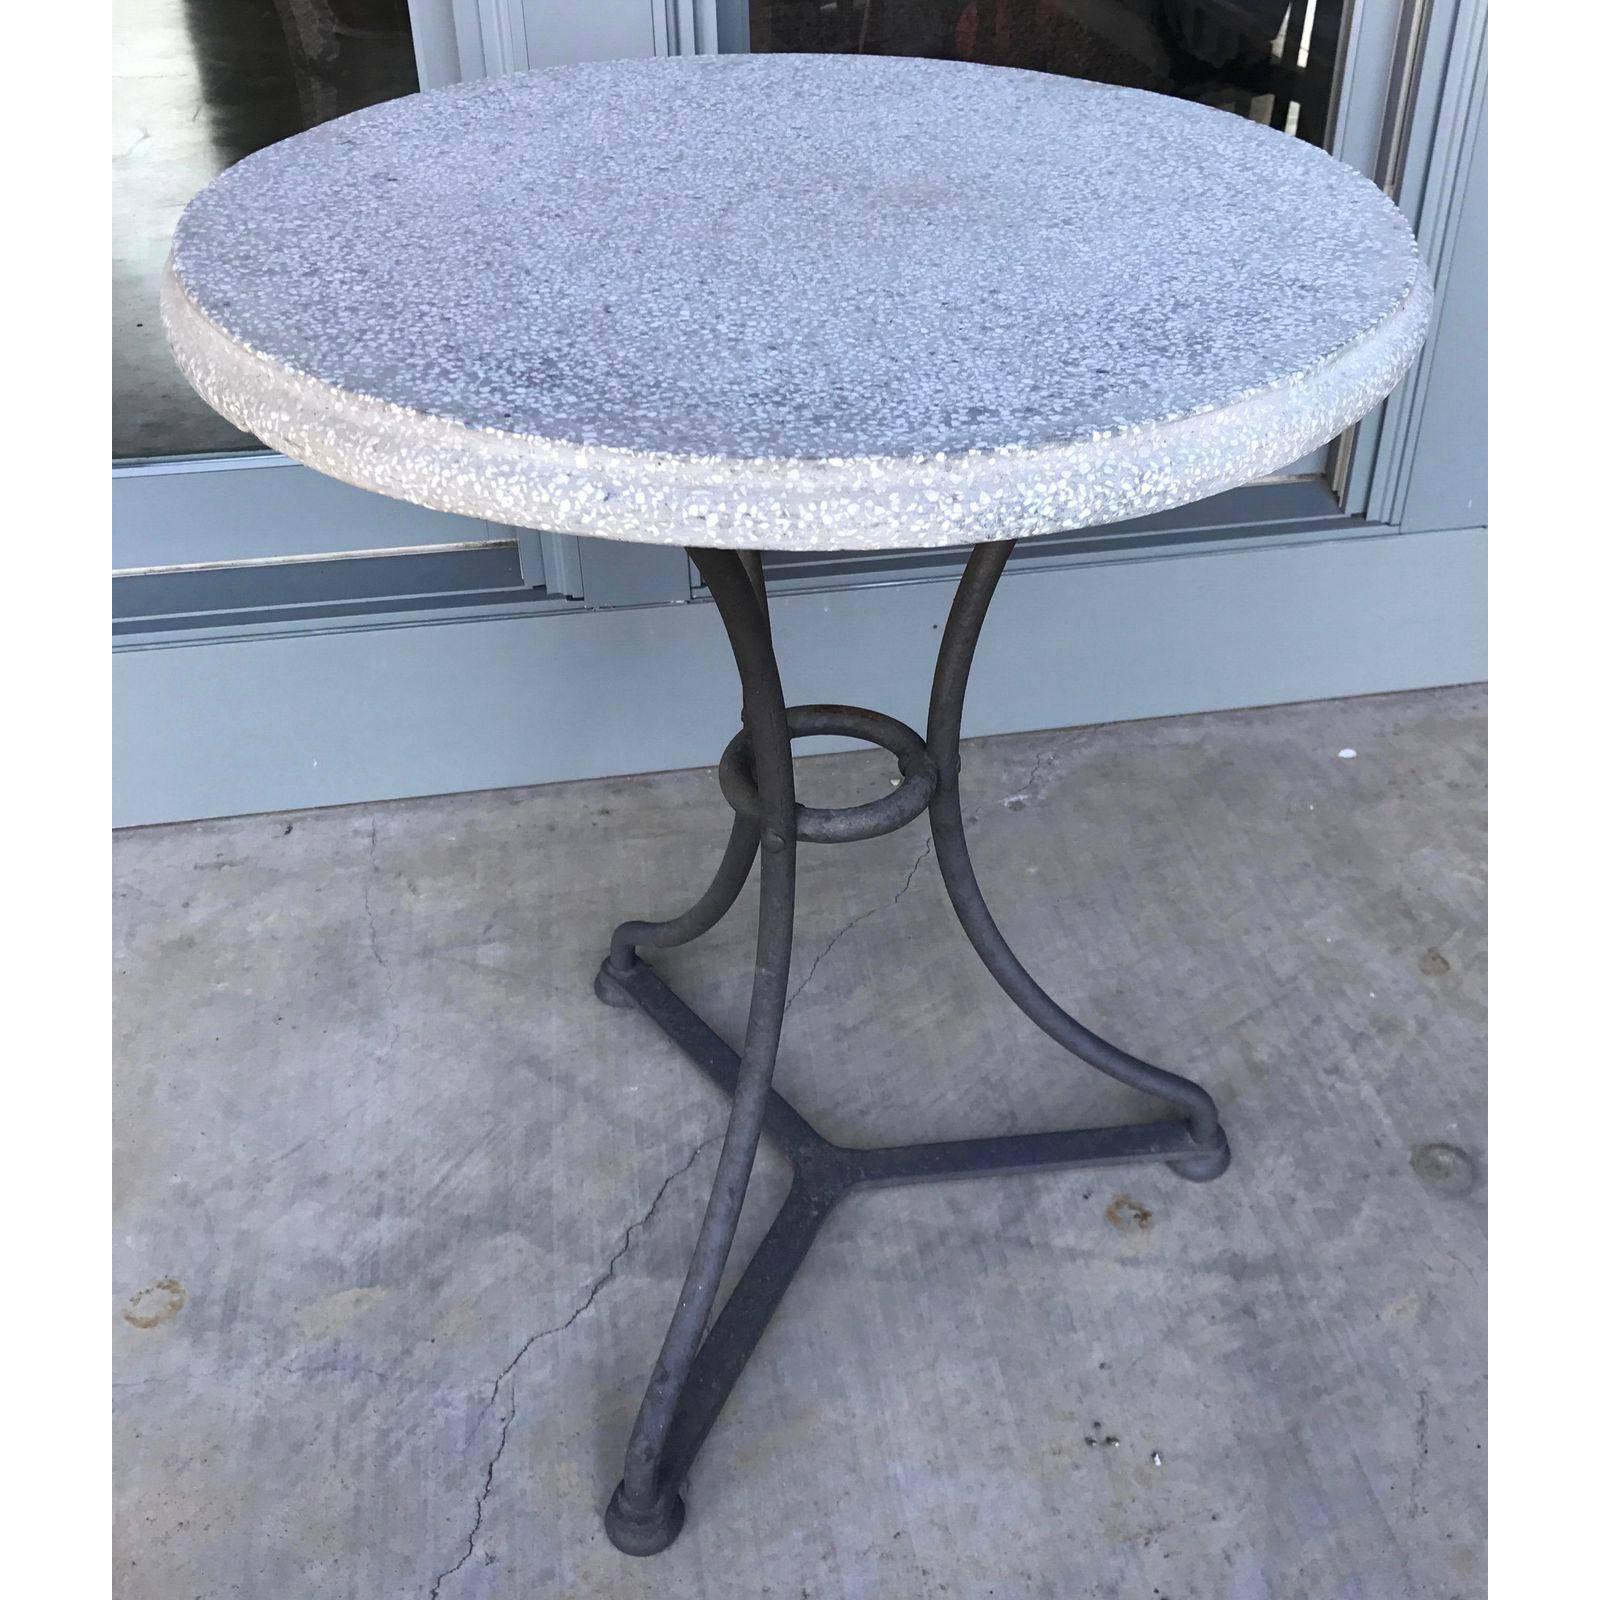 Pair of heavy, painted black iron base bistro tables with terrazzo tops. From Belgium, circa 1960. Good for kitchen, garden, or side tables. Price is for the pair.